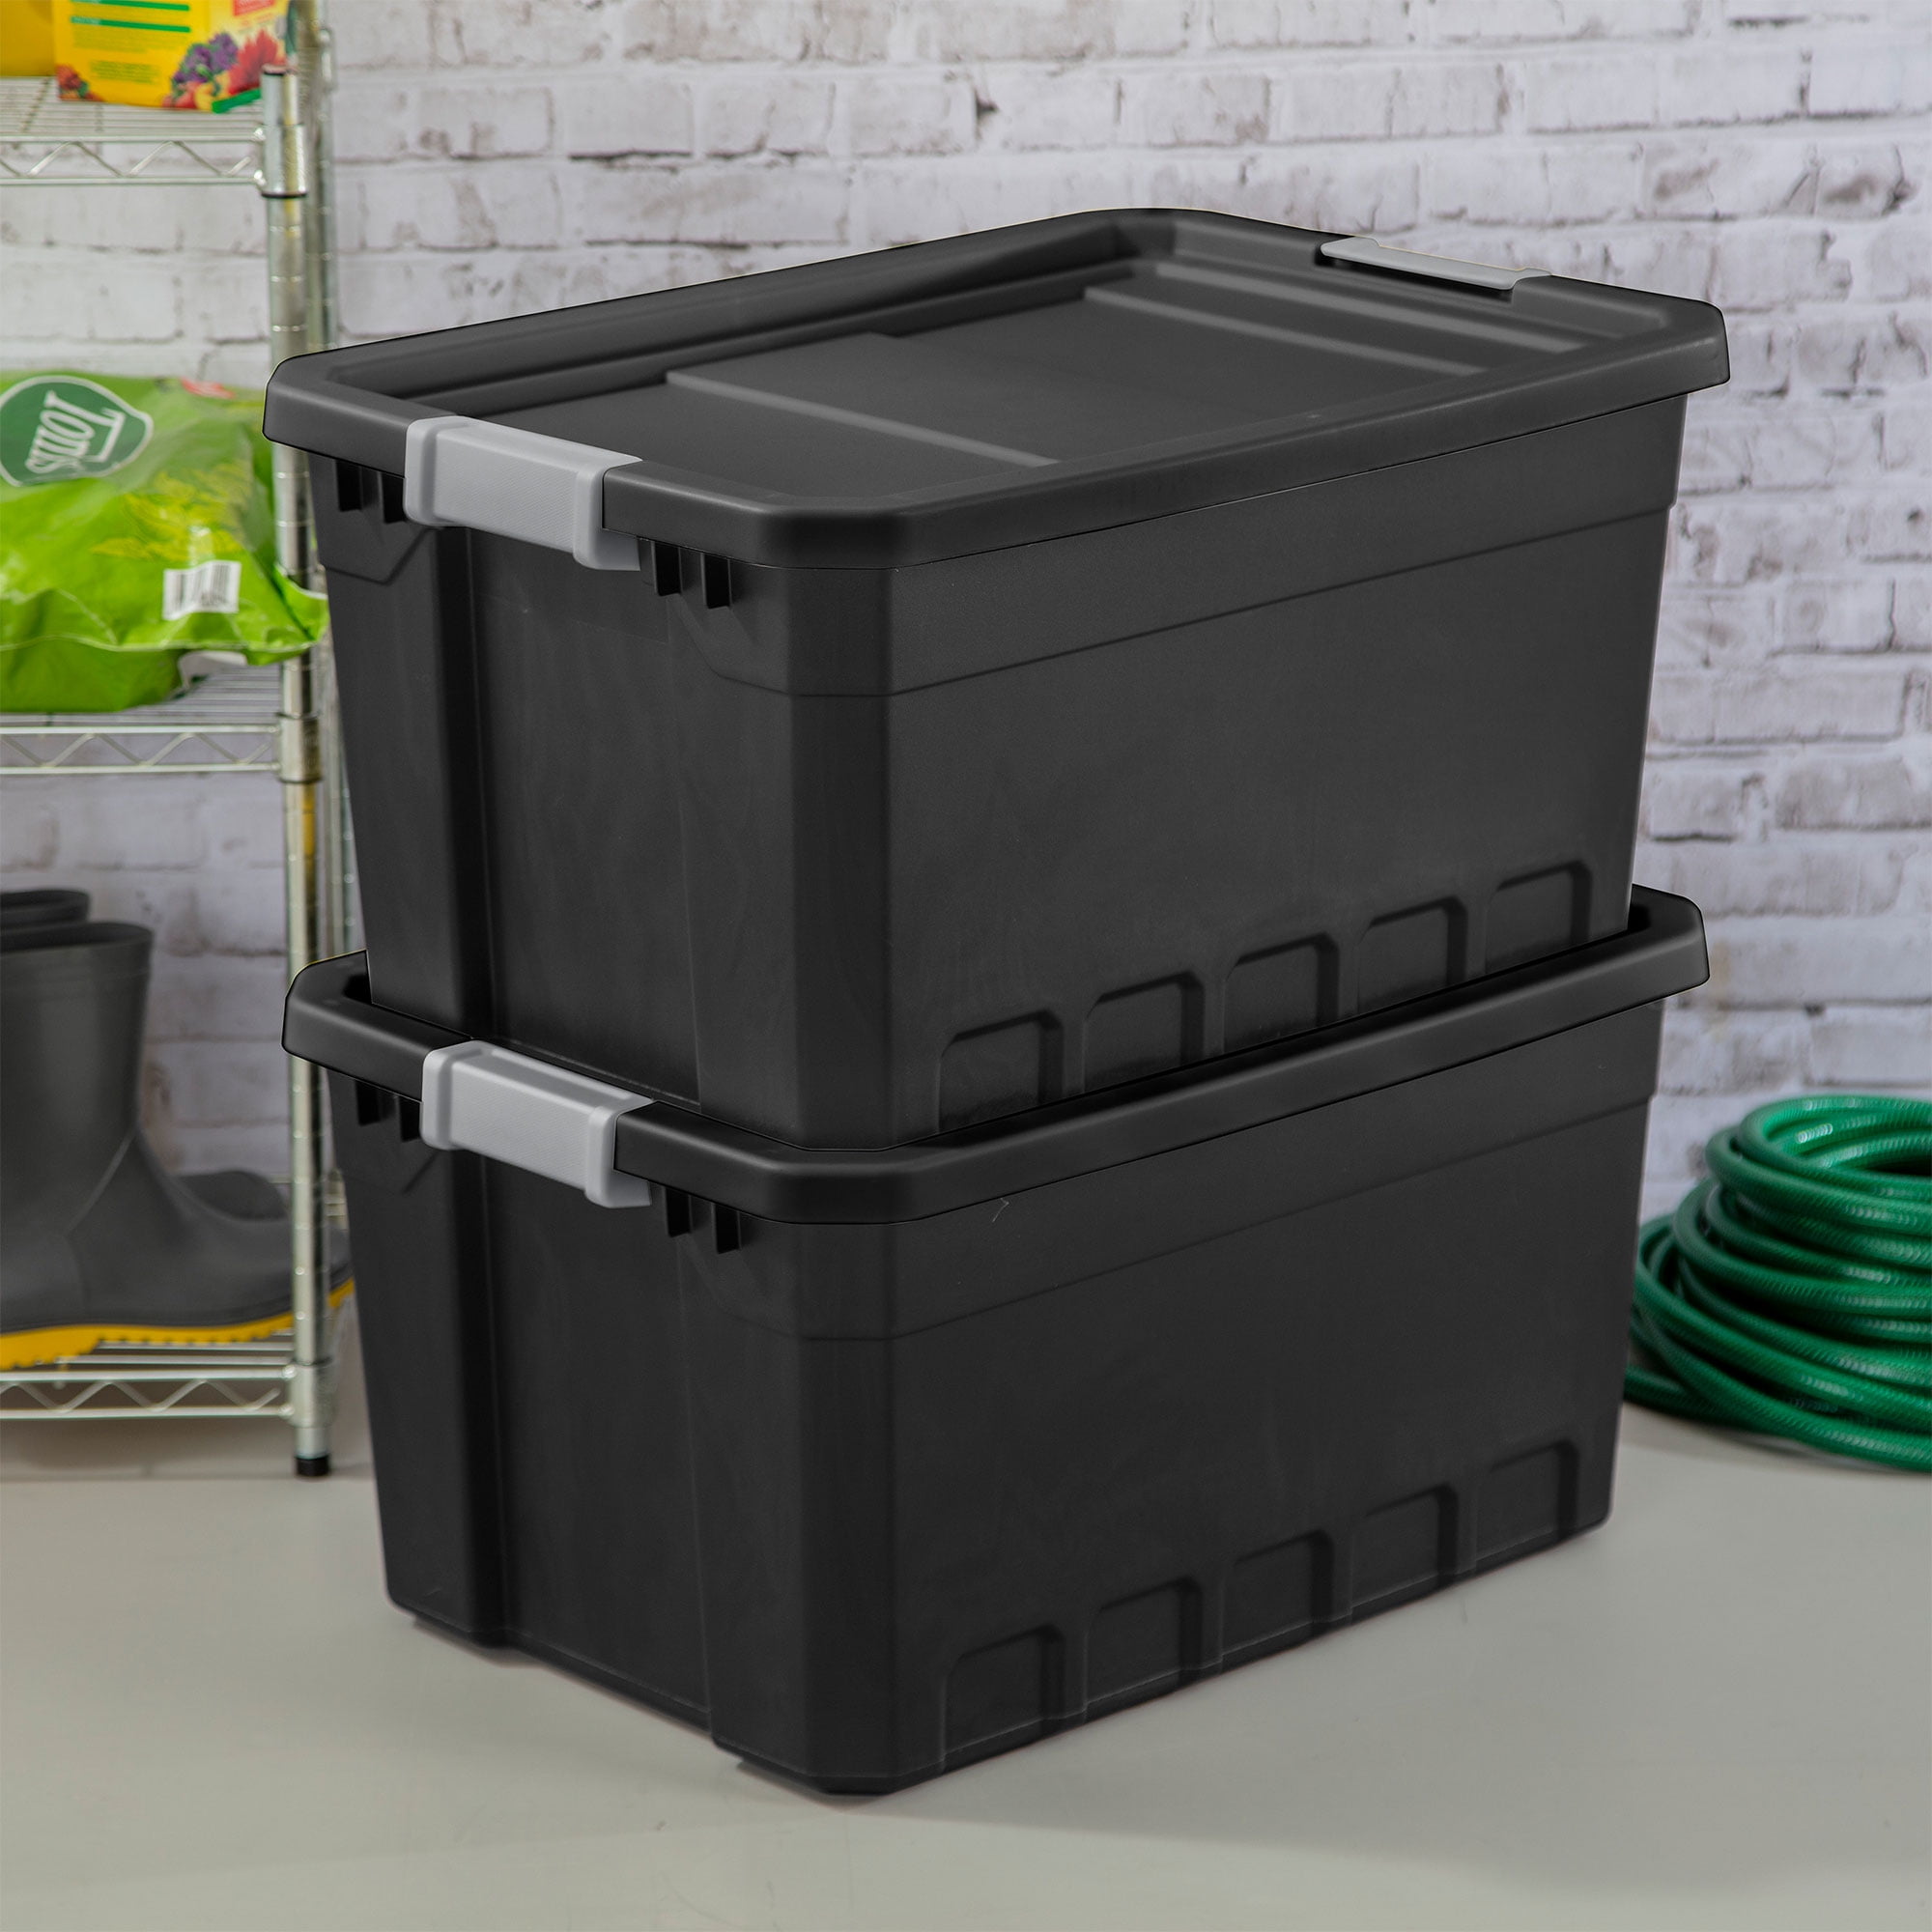 Discontinued* Stackable Storage Bins with Lids - 19 Gallons